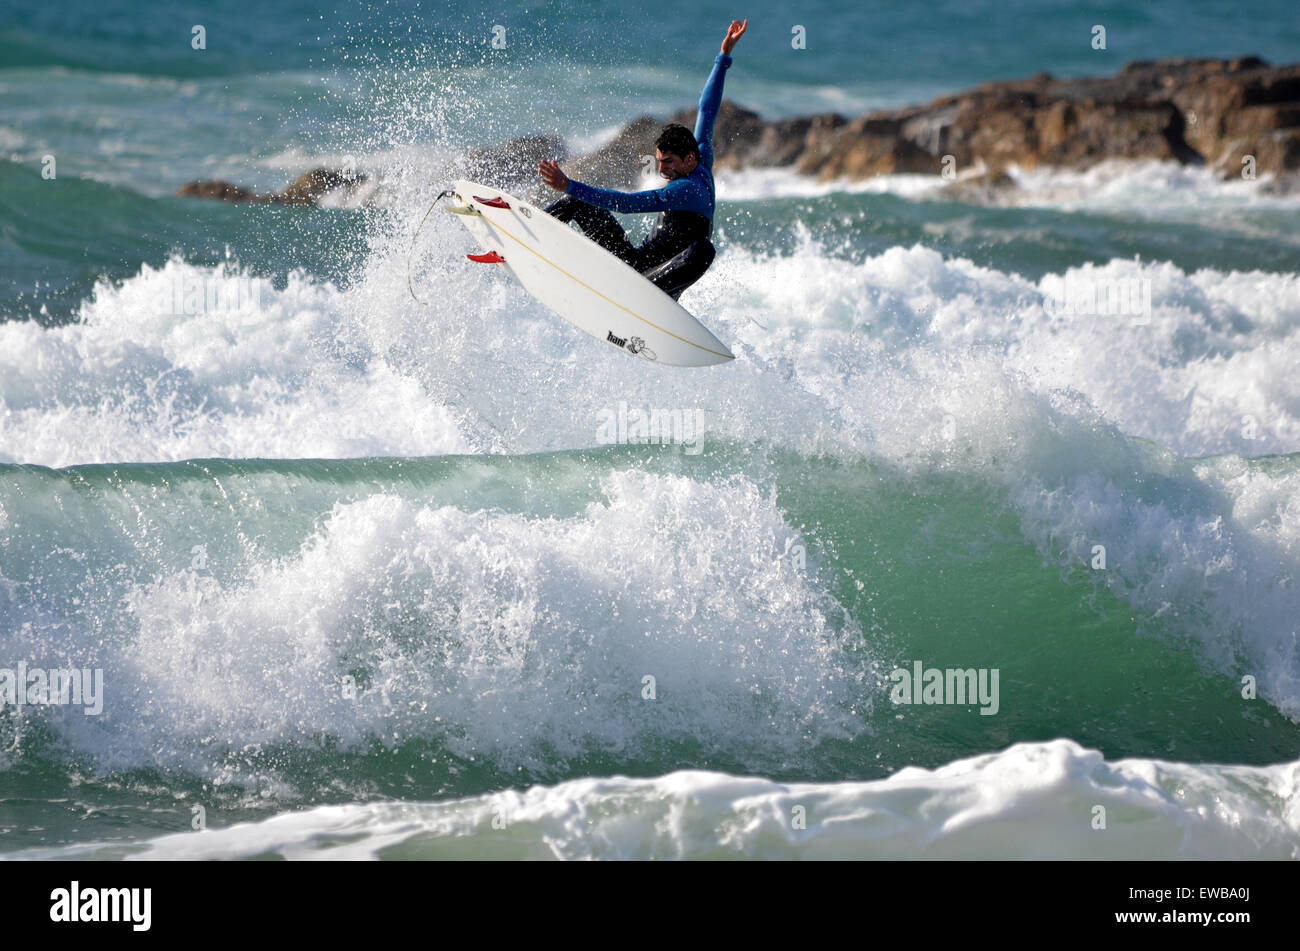 Surfer spins on the crest of a wave Photographed in the Mediterranean Sea, Tel Aviv Israel Stock Photo